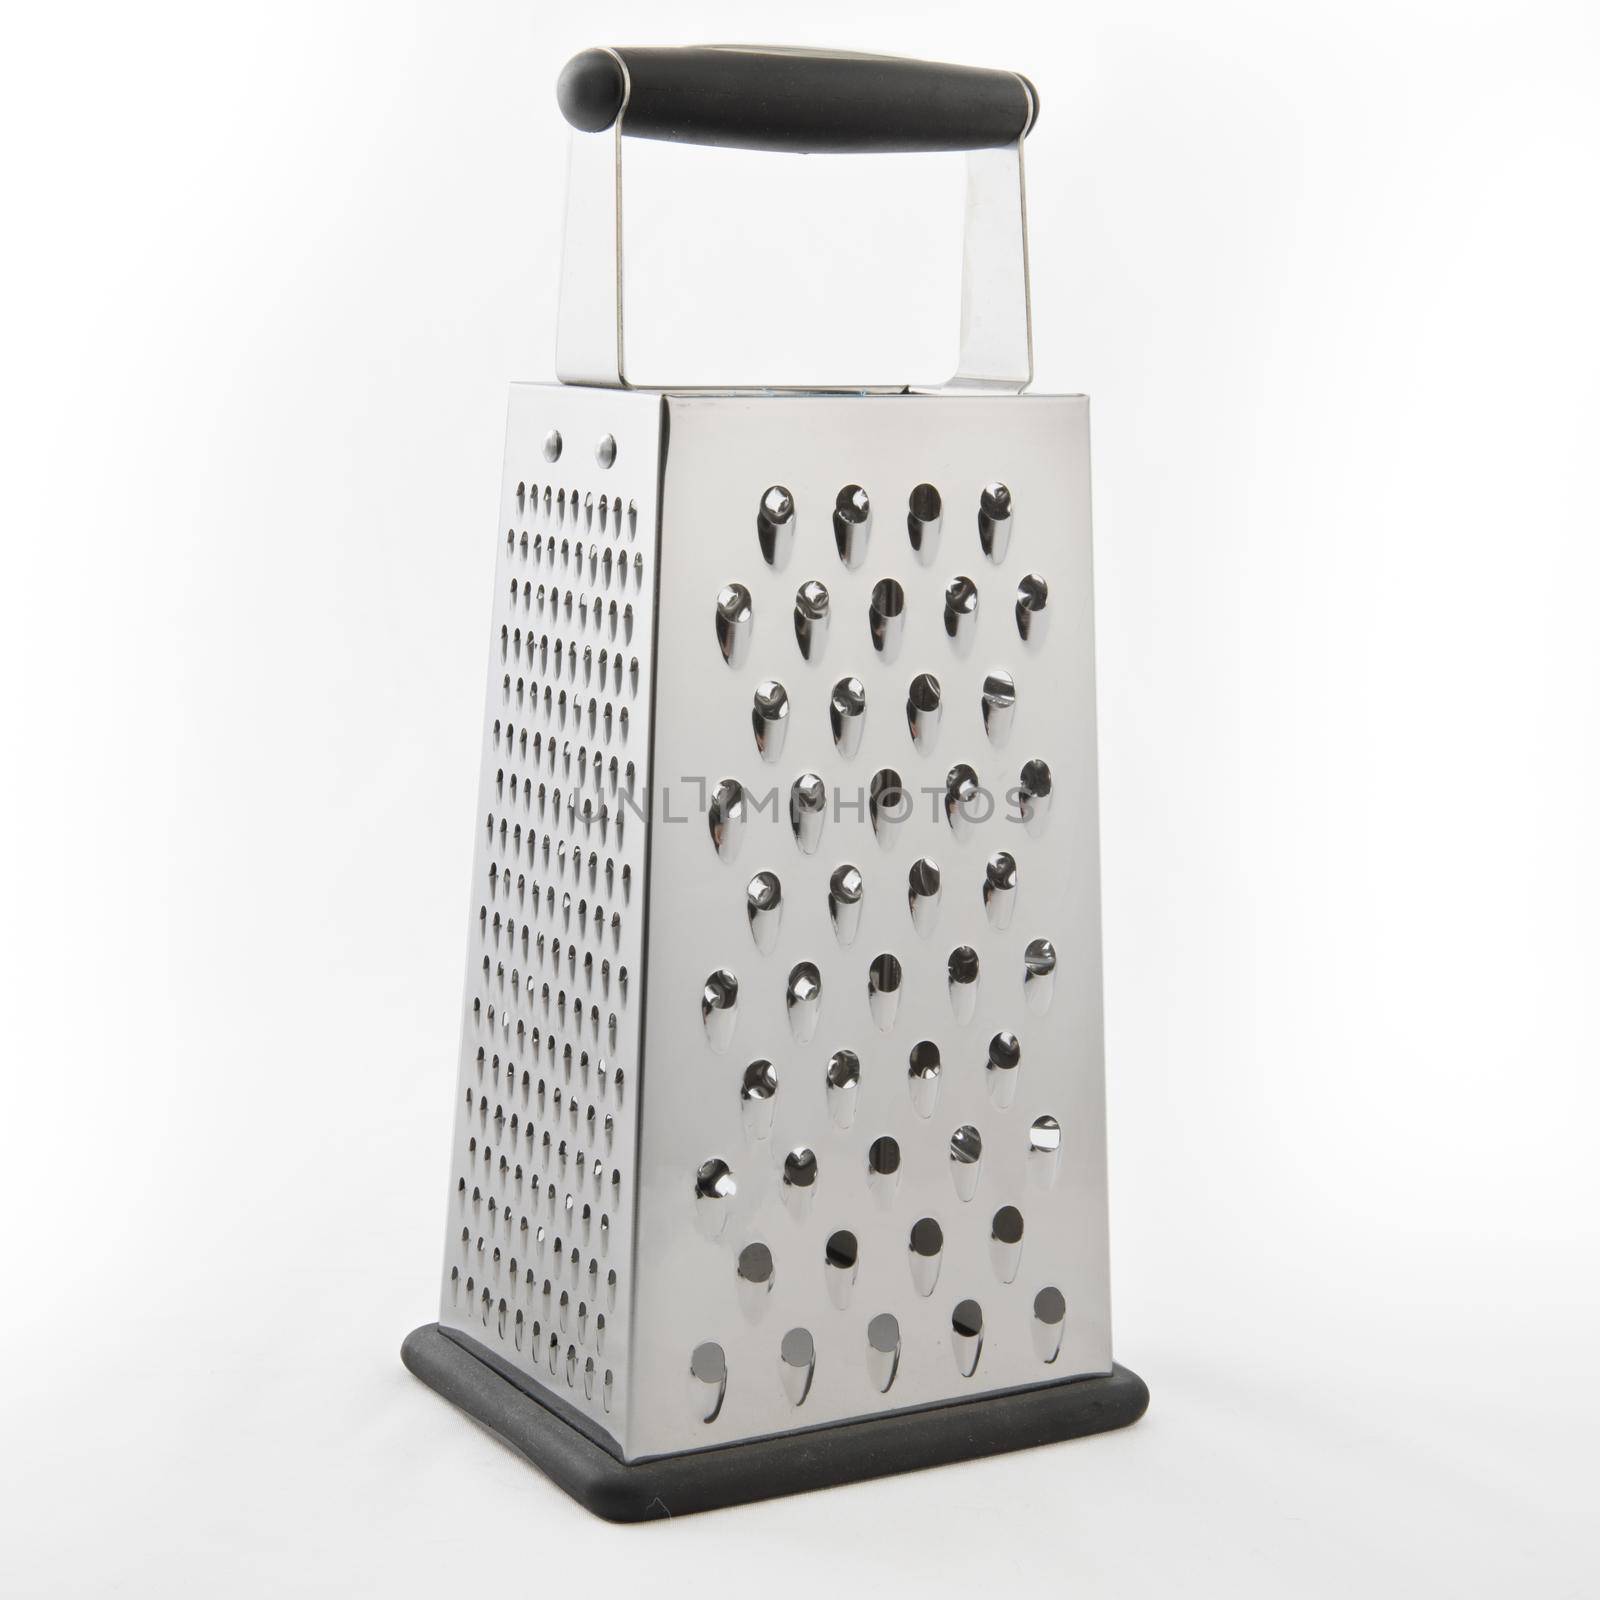 Metal cheese grater isolated on a white background, with slight shadow.